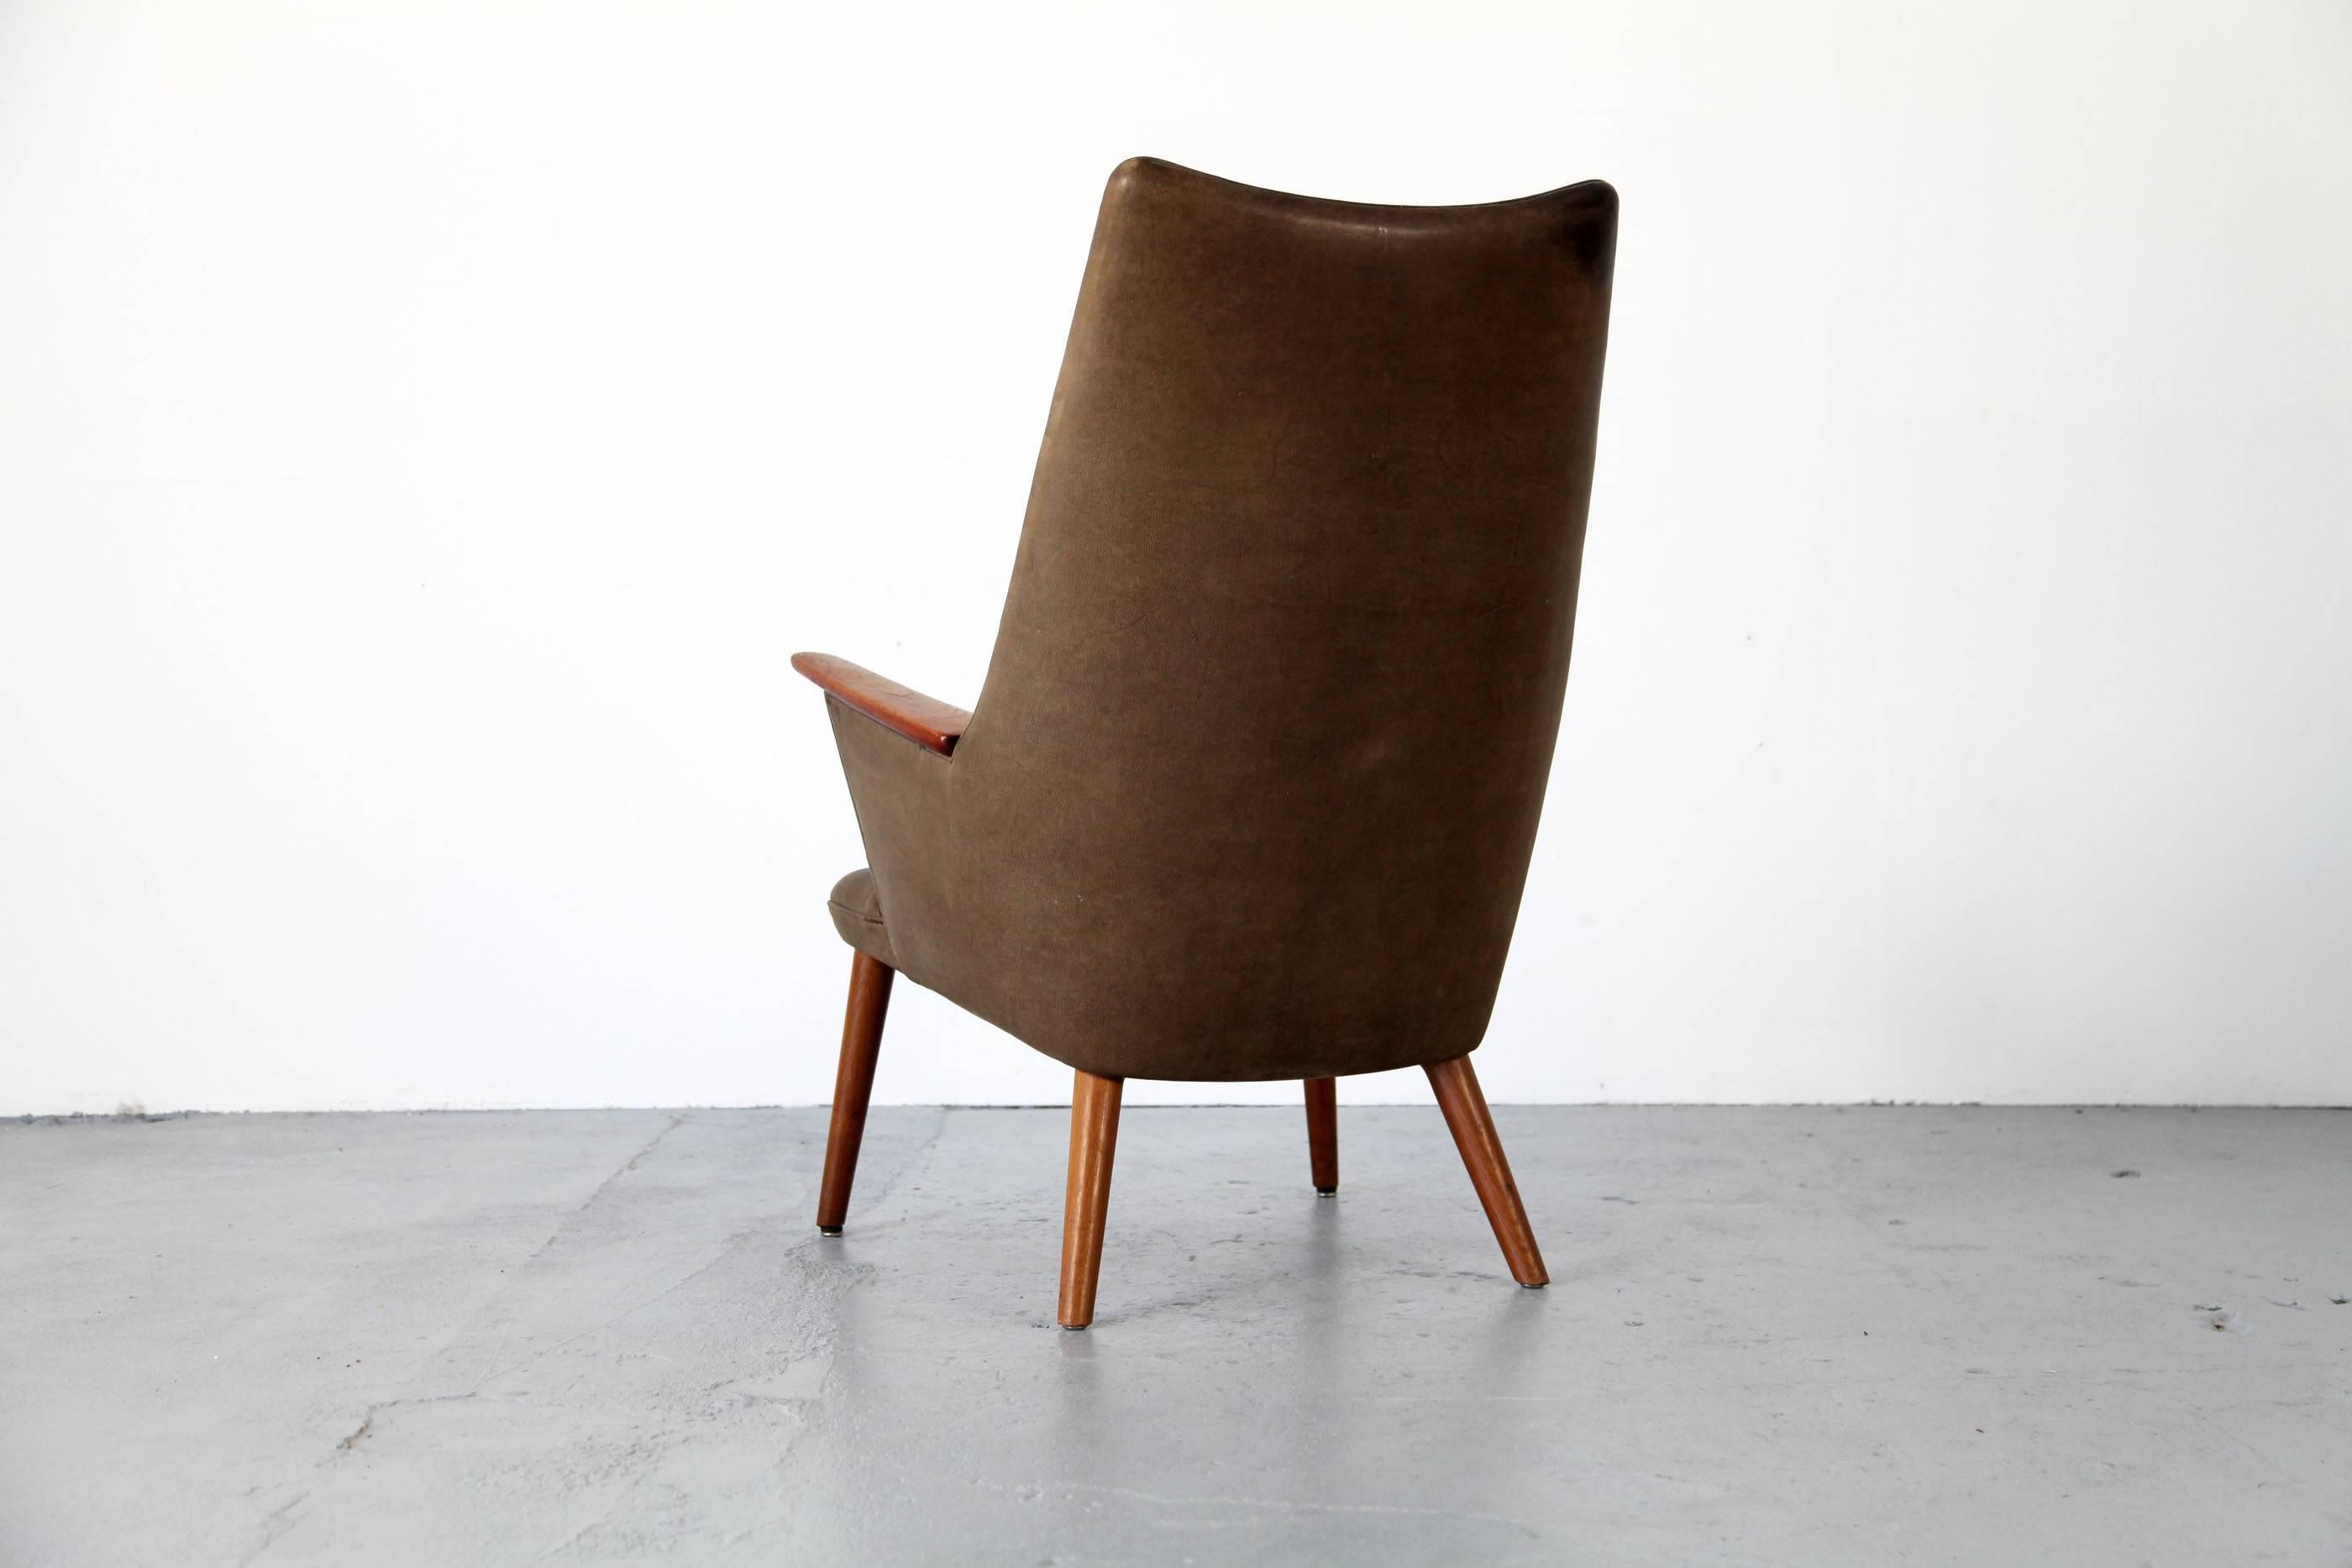 20th Century Lounge Chair by Hans J. Wegner, Produced by A.P. Stolen